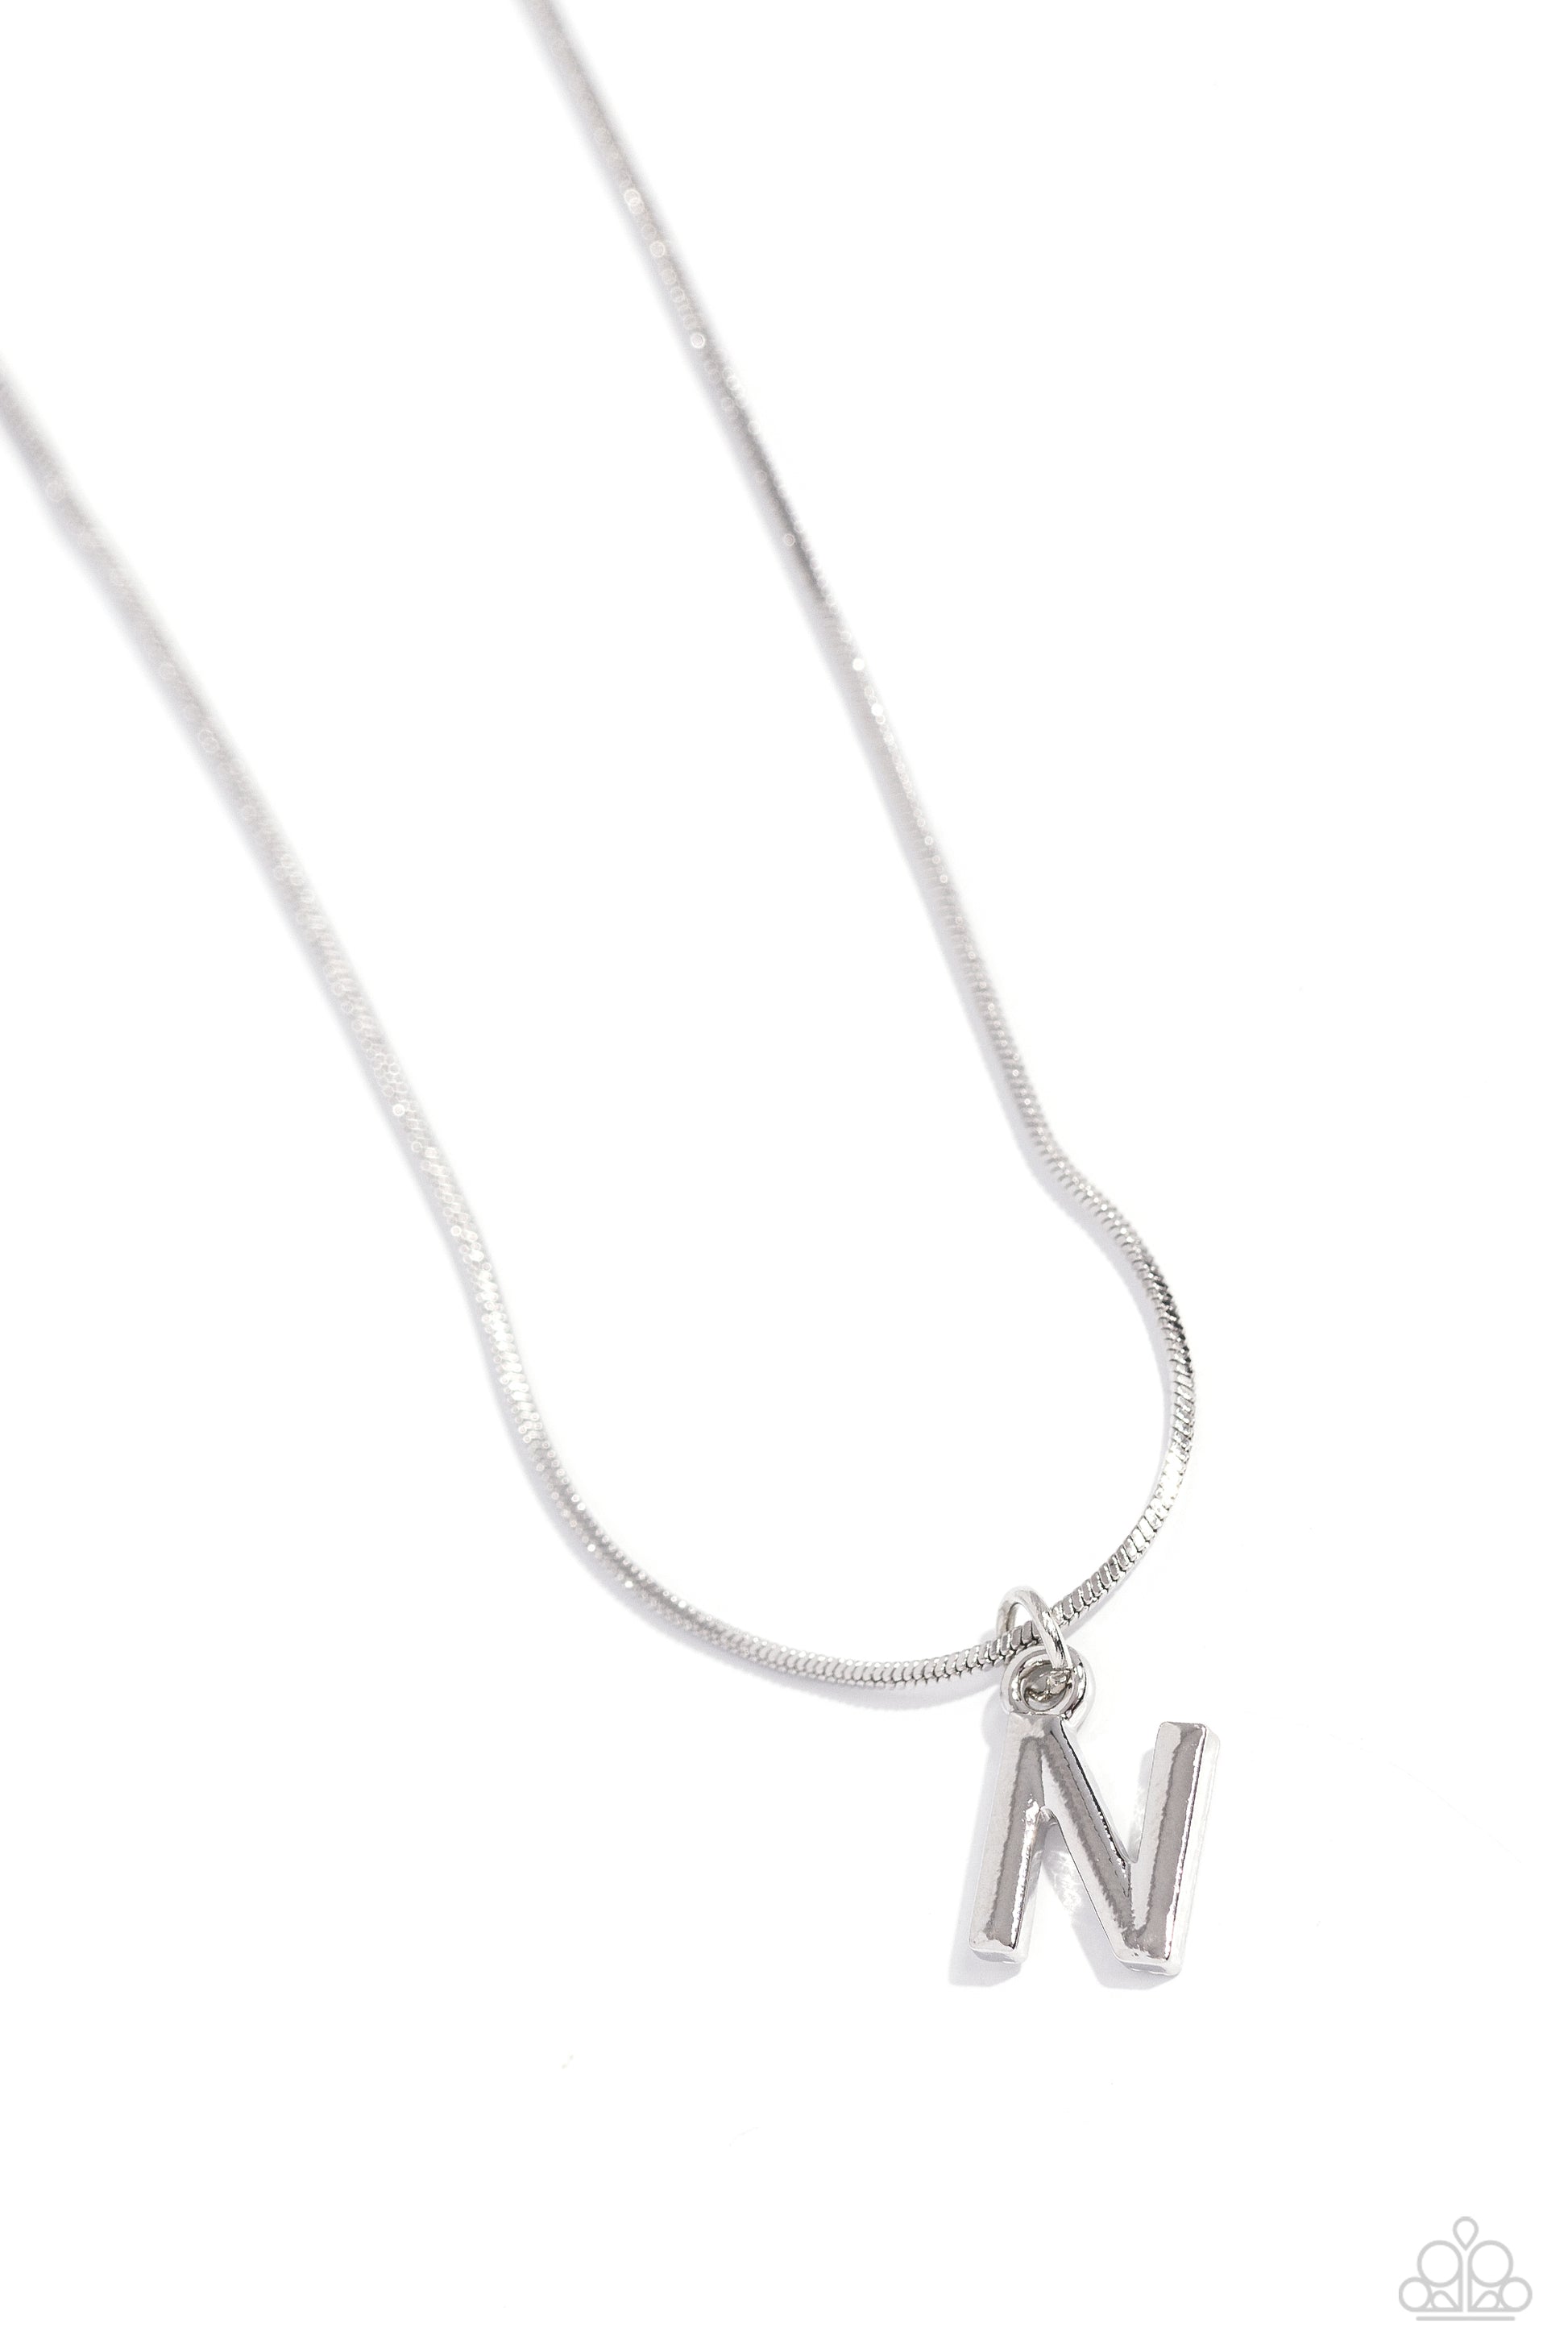 Seize the Initial - silver - N - Paparazzi necklace